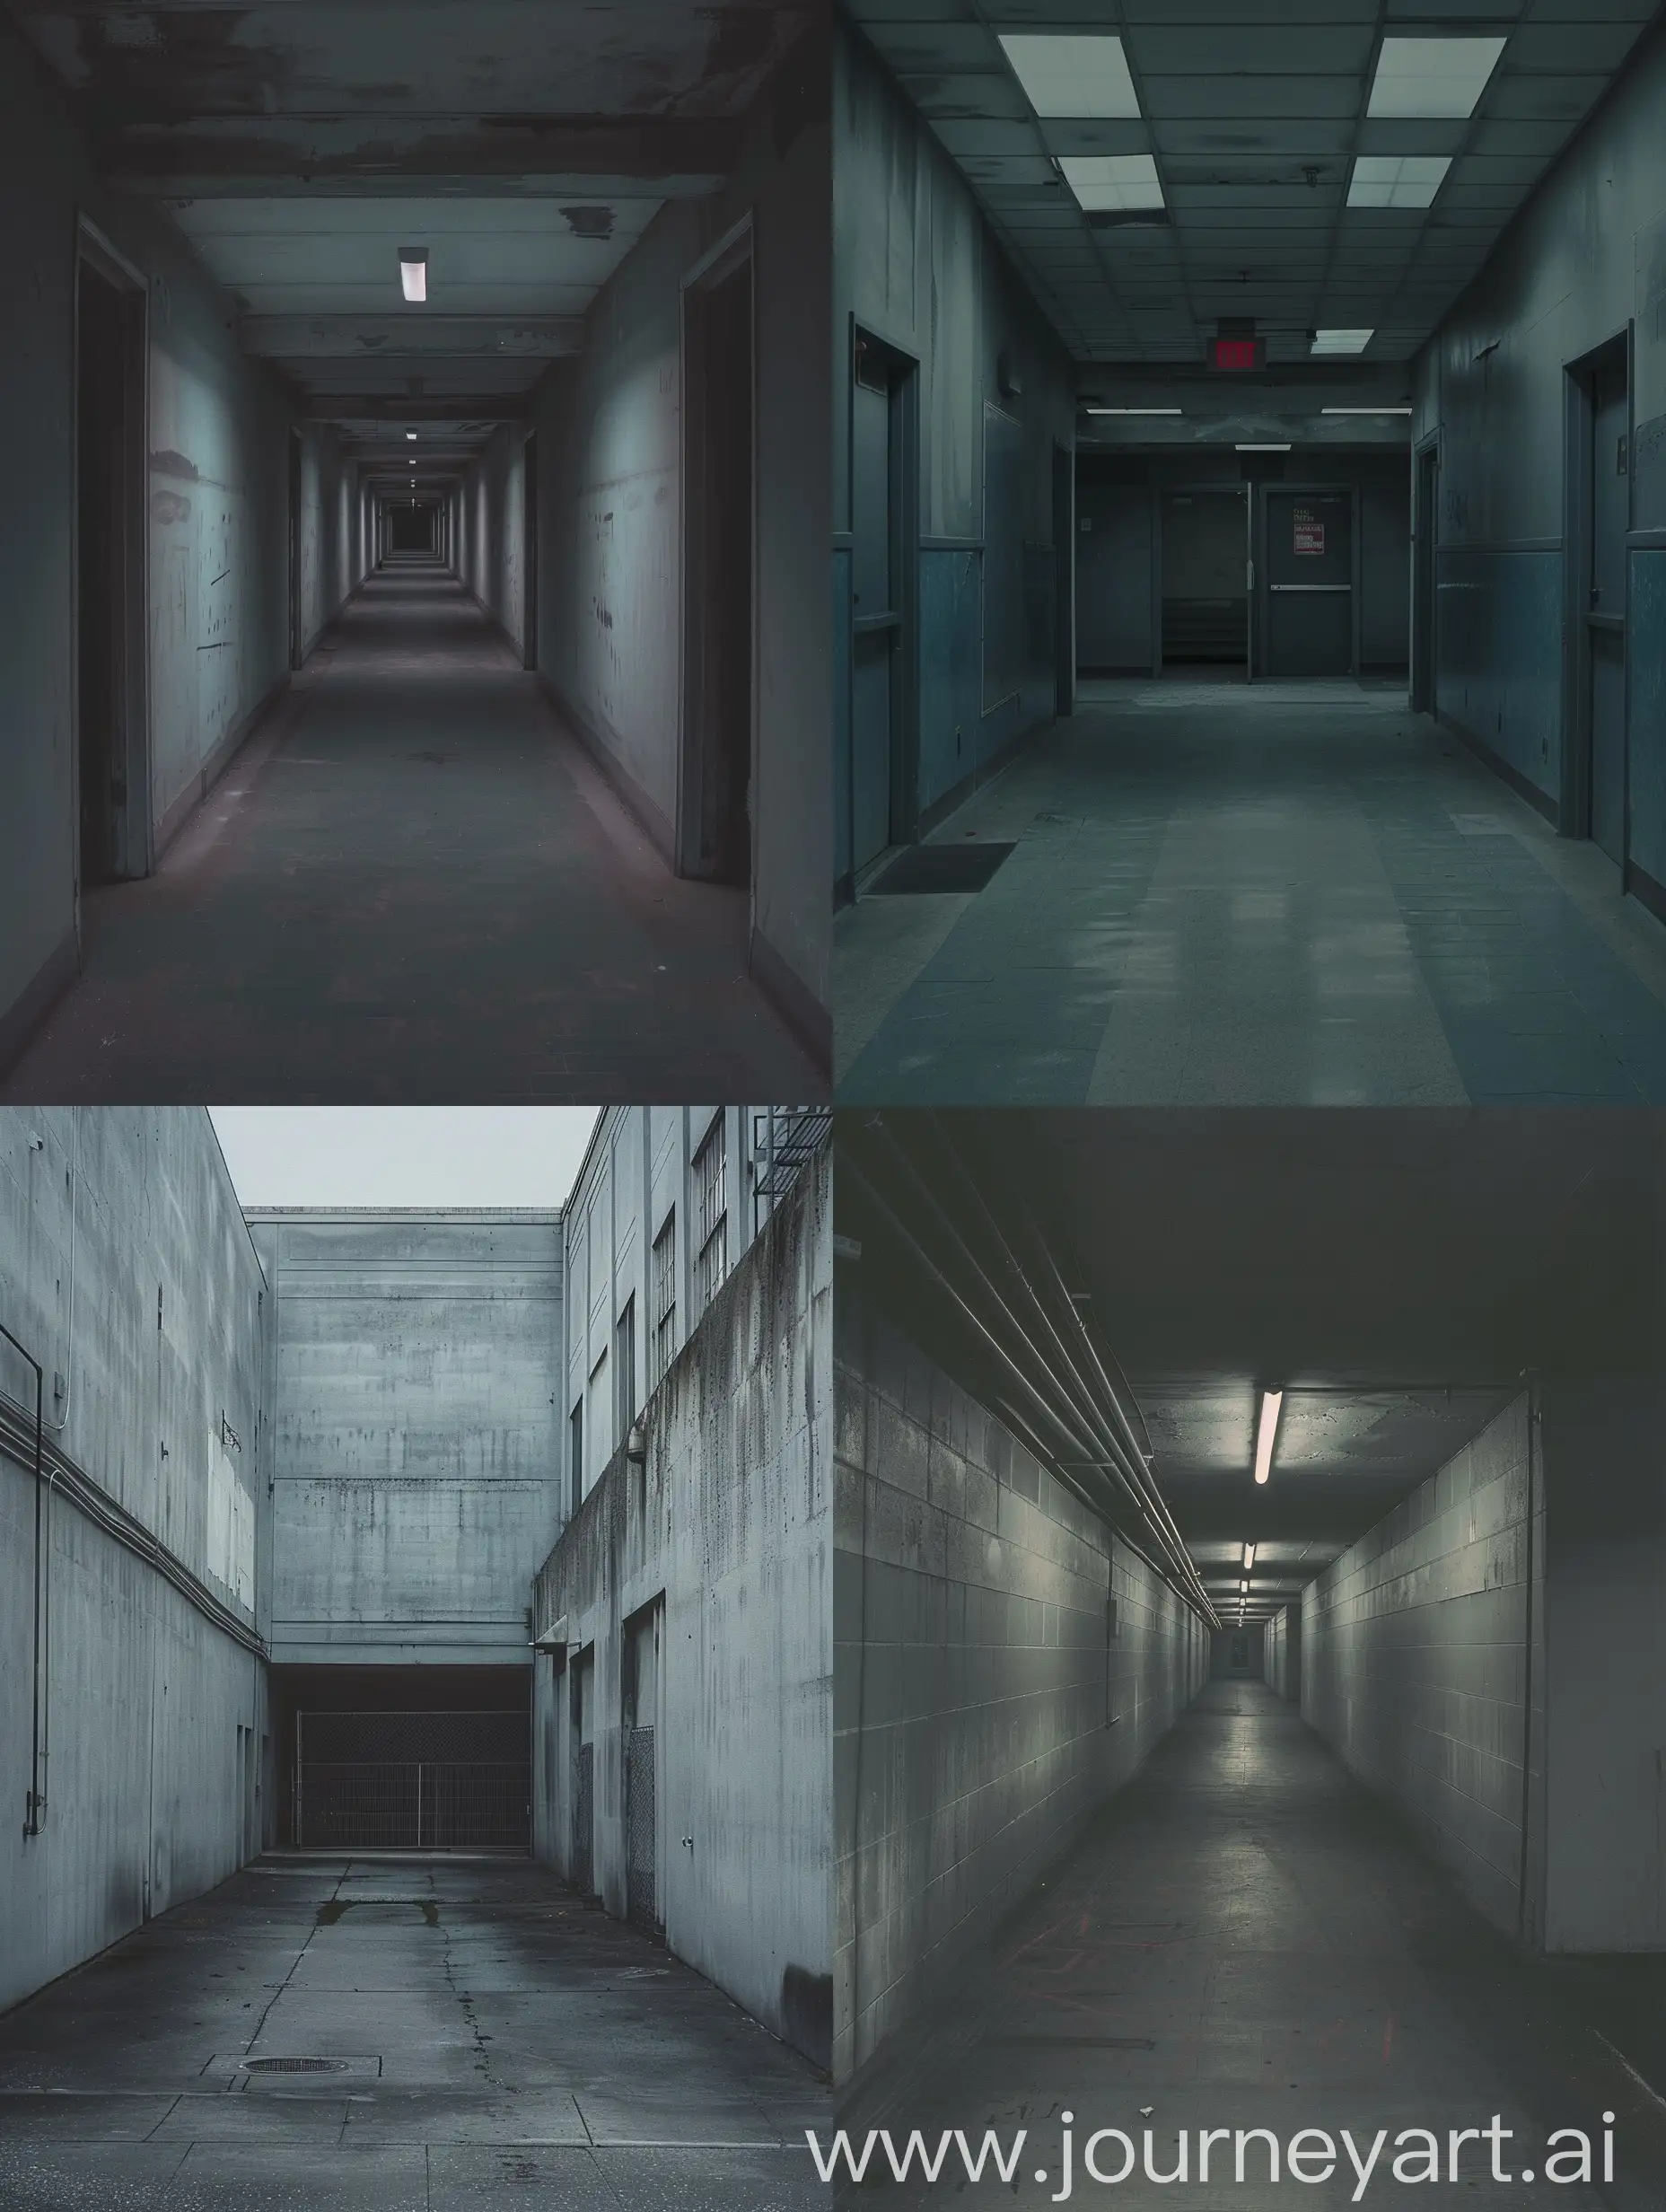 Early 2000s found footage, empty and eerie
alley, muted grey tones